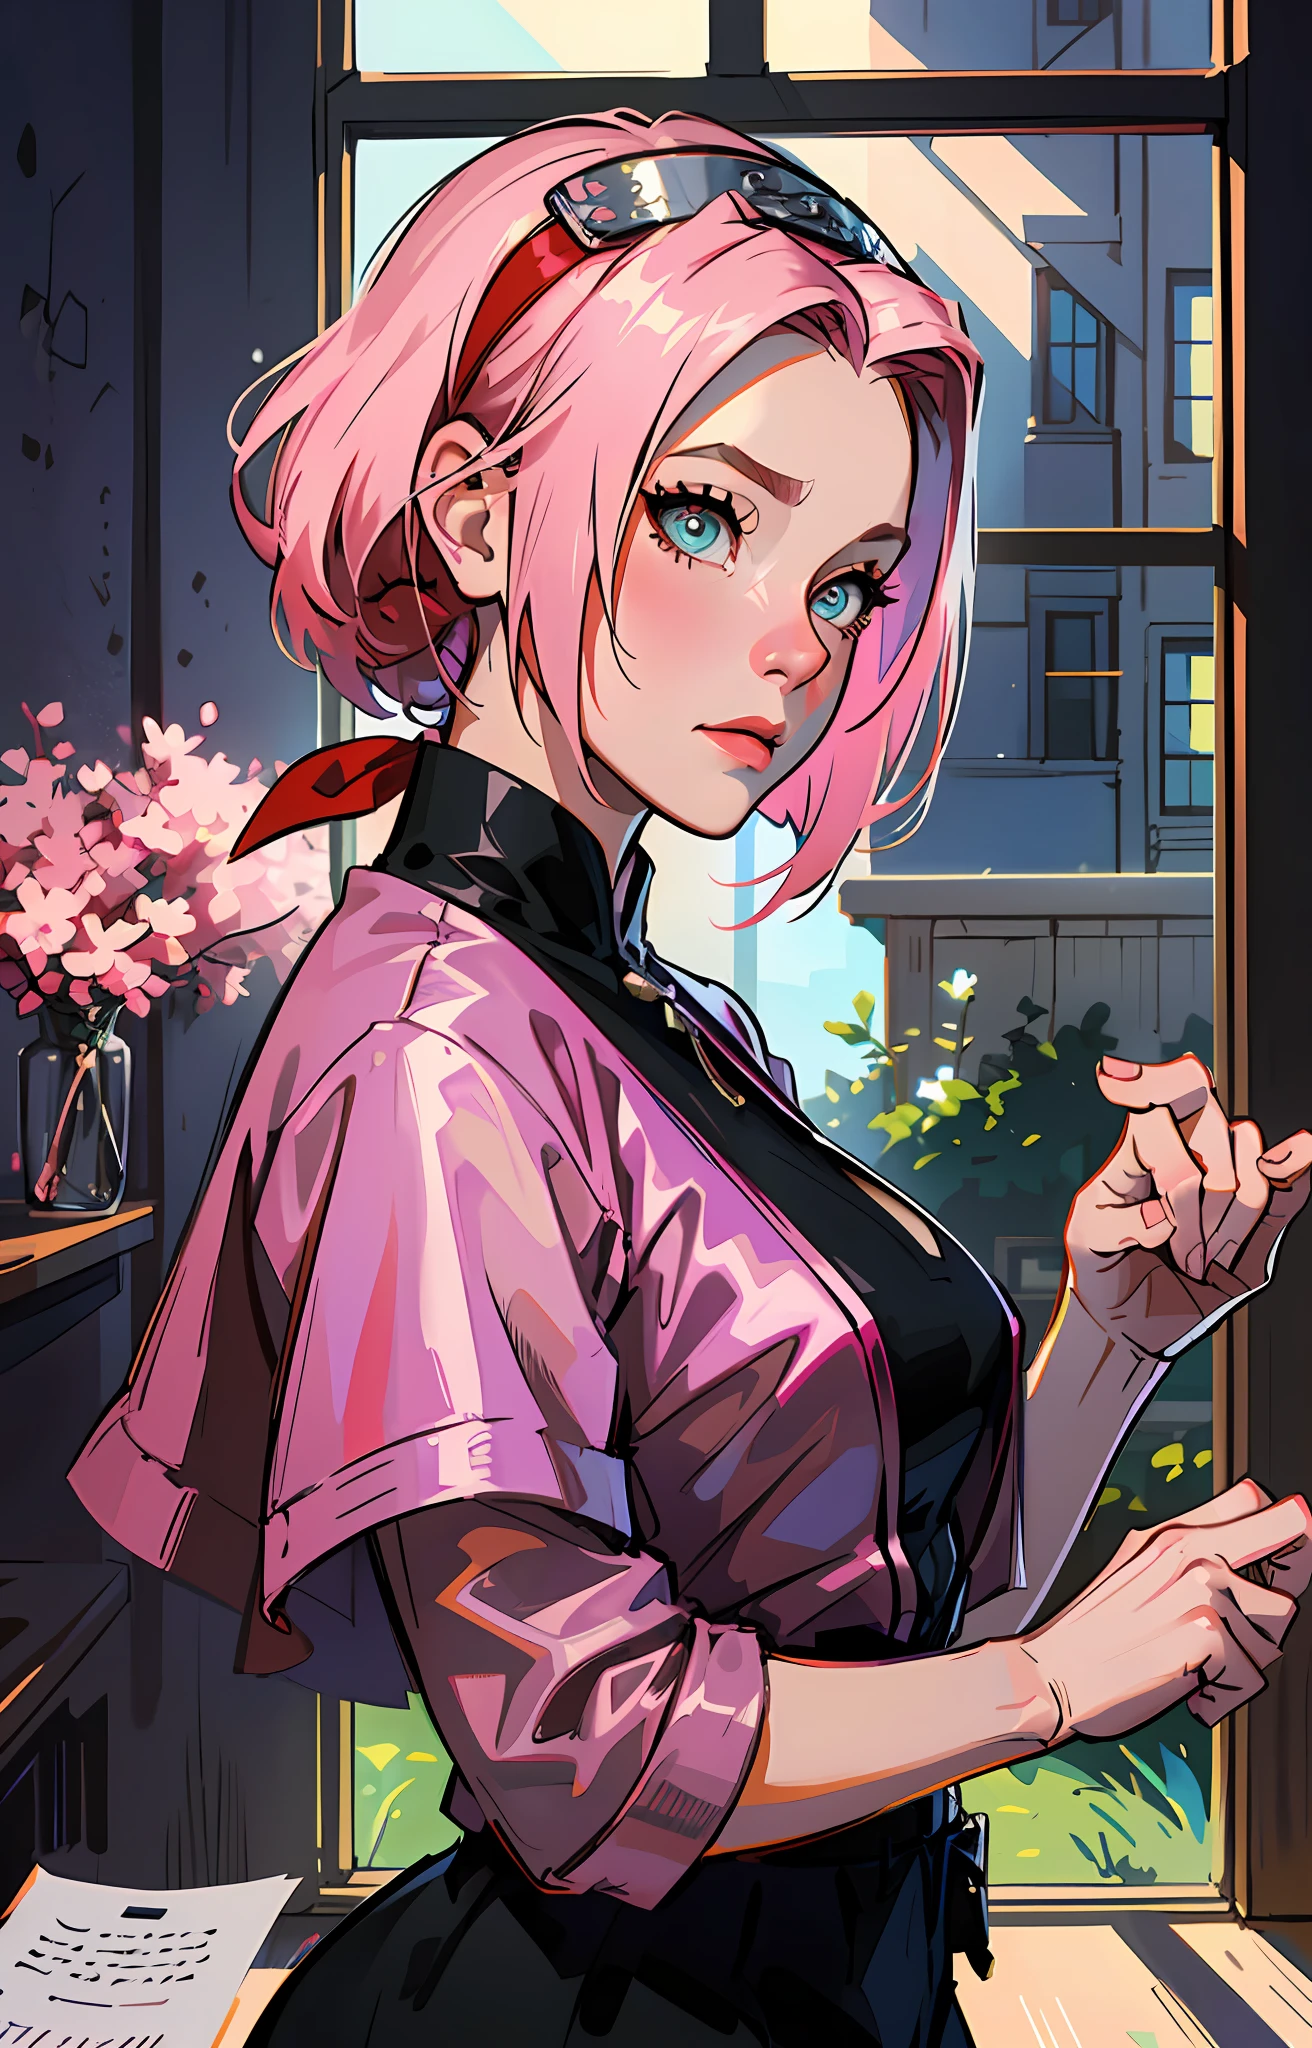 sakura haruno, ((soli)), alone, ((Head for the exhibition)), chic,wearing a red blouse and a light pink skirt,  Sakura Haruno in Naruto Shippuden,  she's charming, appealing, pink  hair, dainty, Youngh, shorth hair, detailded, hight definition, ((fully body)), she's in her house looking at a picture, gazing at viewer,  she's a beautiful woman ,  beautiful and nice woman, Linda, Bela, high qualiy, defined eyes, hight definition, shiny, sharp strokes, Linda, red bow in hair,trending on ArtStation, por RHADS, andreas rocha, Horse, Makoto Shinkai, Laurie Greasley, lois van baarle, Ilya Kuvshinov e Greg Rutkowski